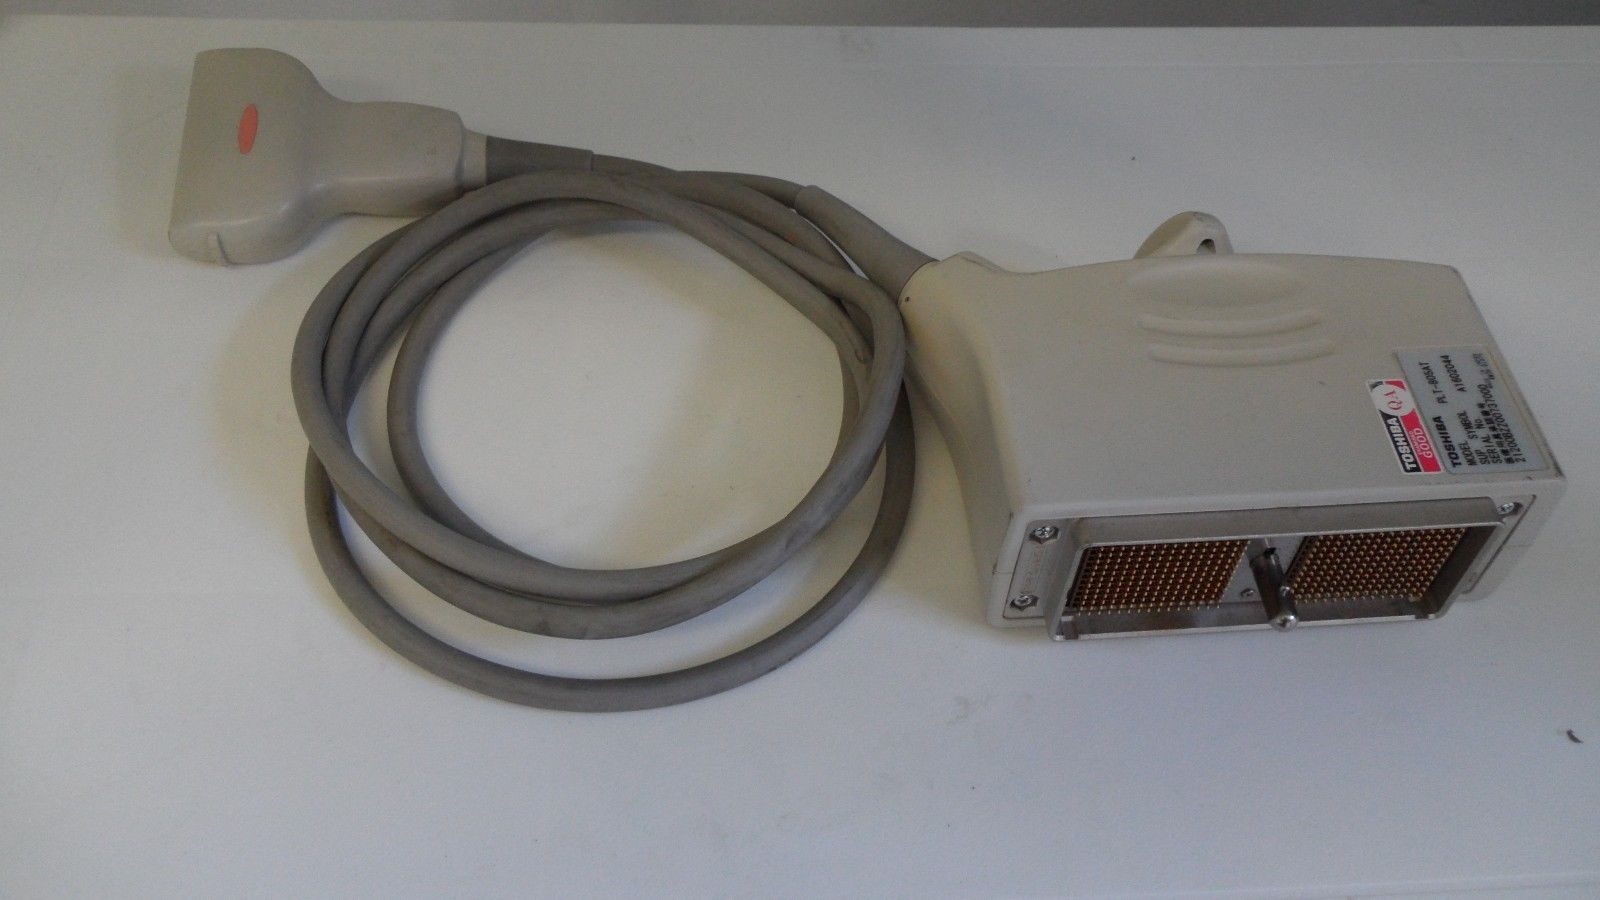 Toshiba PLT-805AT 8MHz Linear Ultrasound Transducer Probe DIAGNOSTIC ULTRASOUND MACHINES FOR SALE